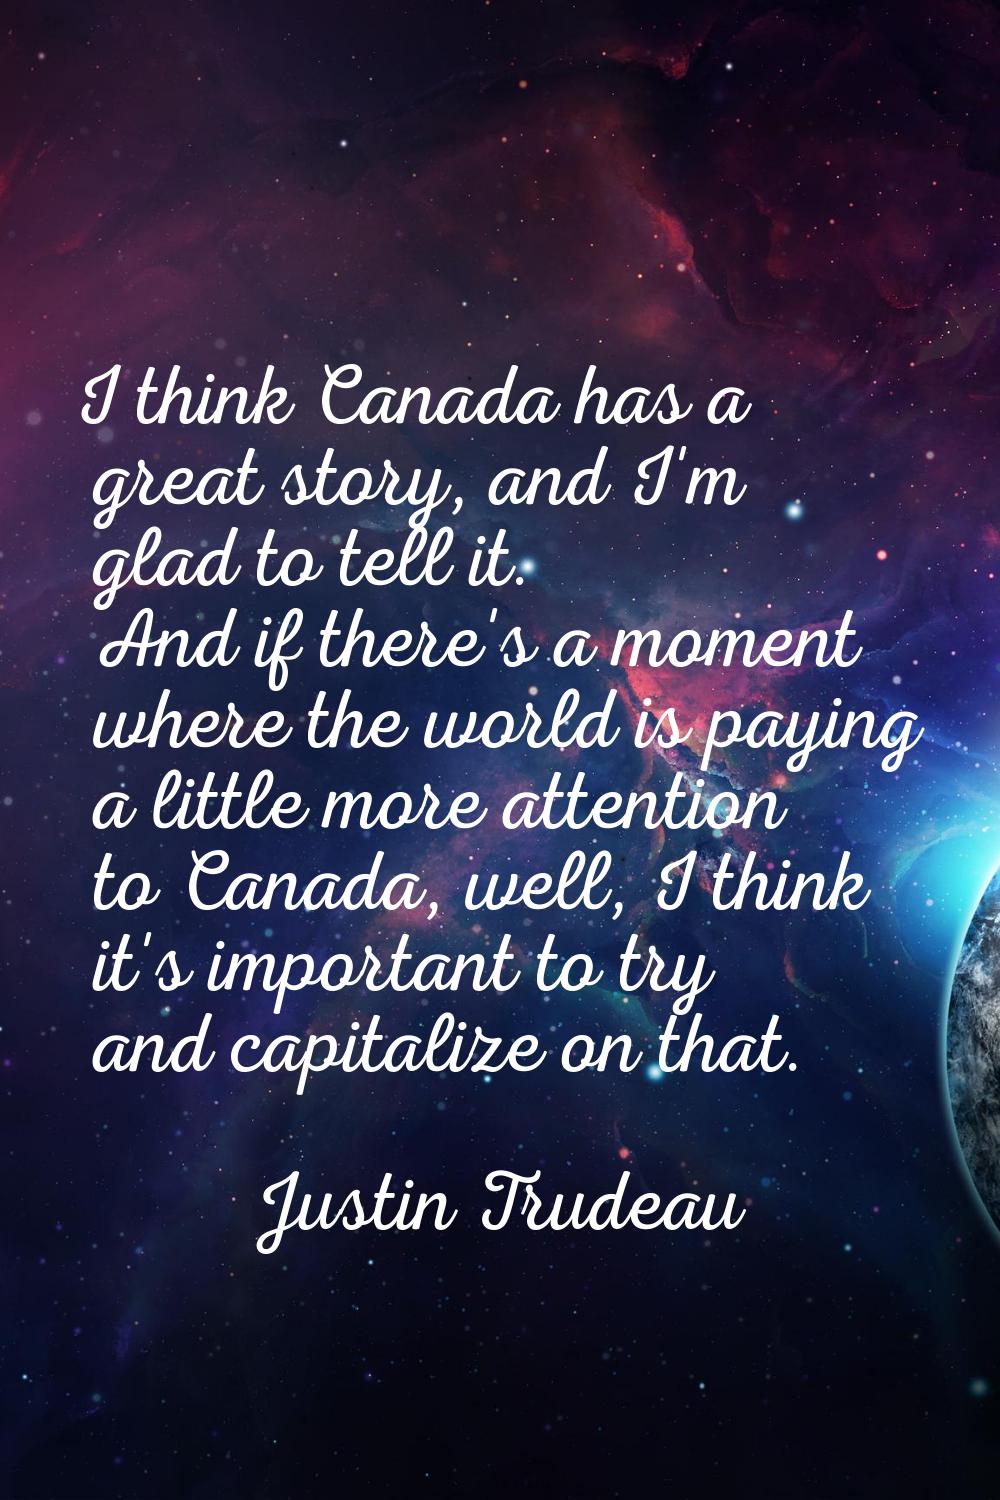 I think Canada has a great story, and I'm glad to tell it. And if there's a moment where the world 